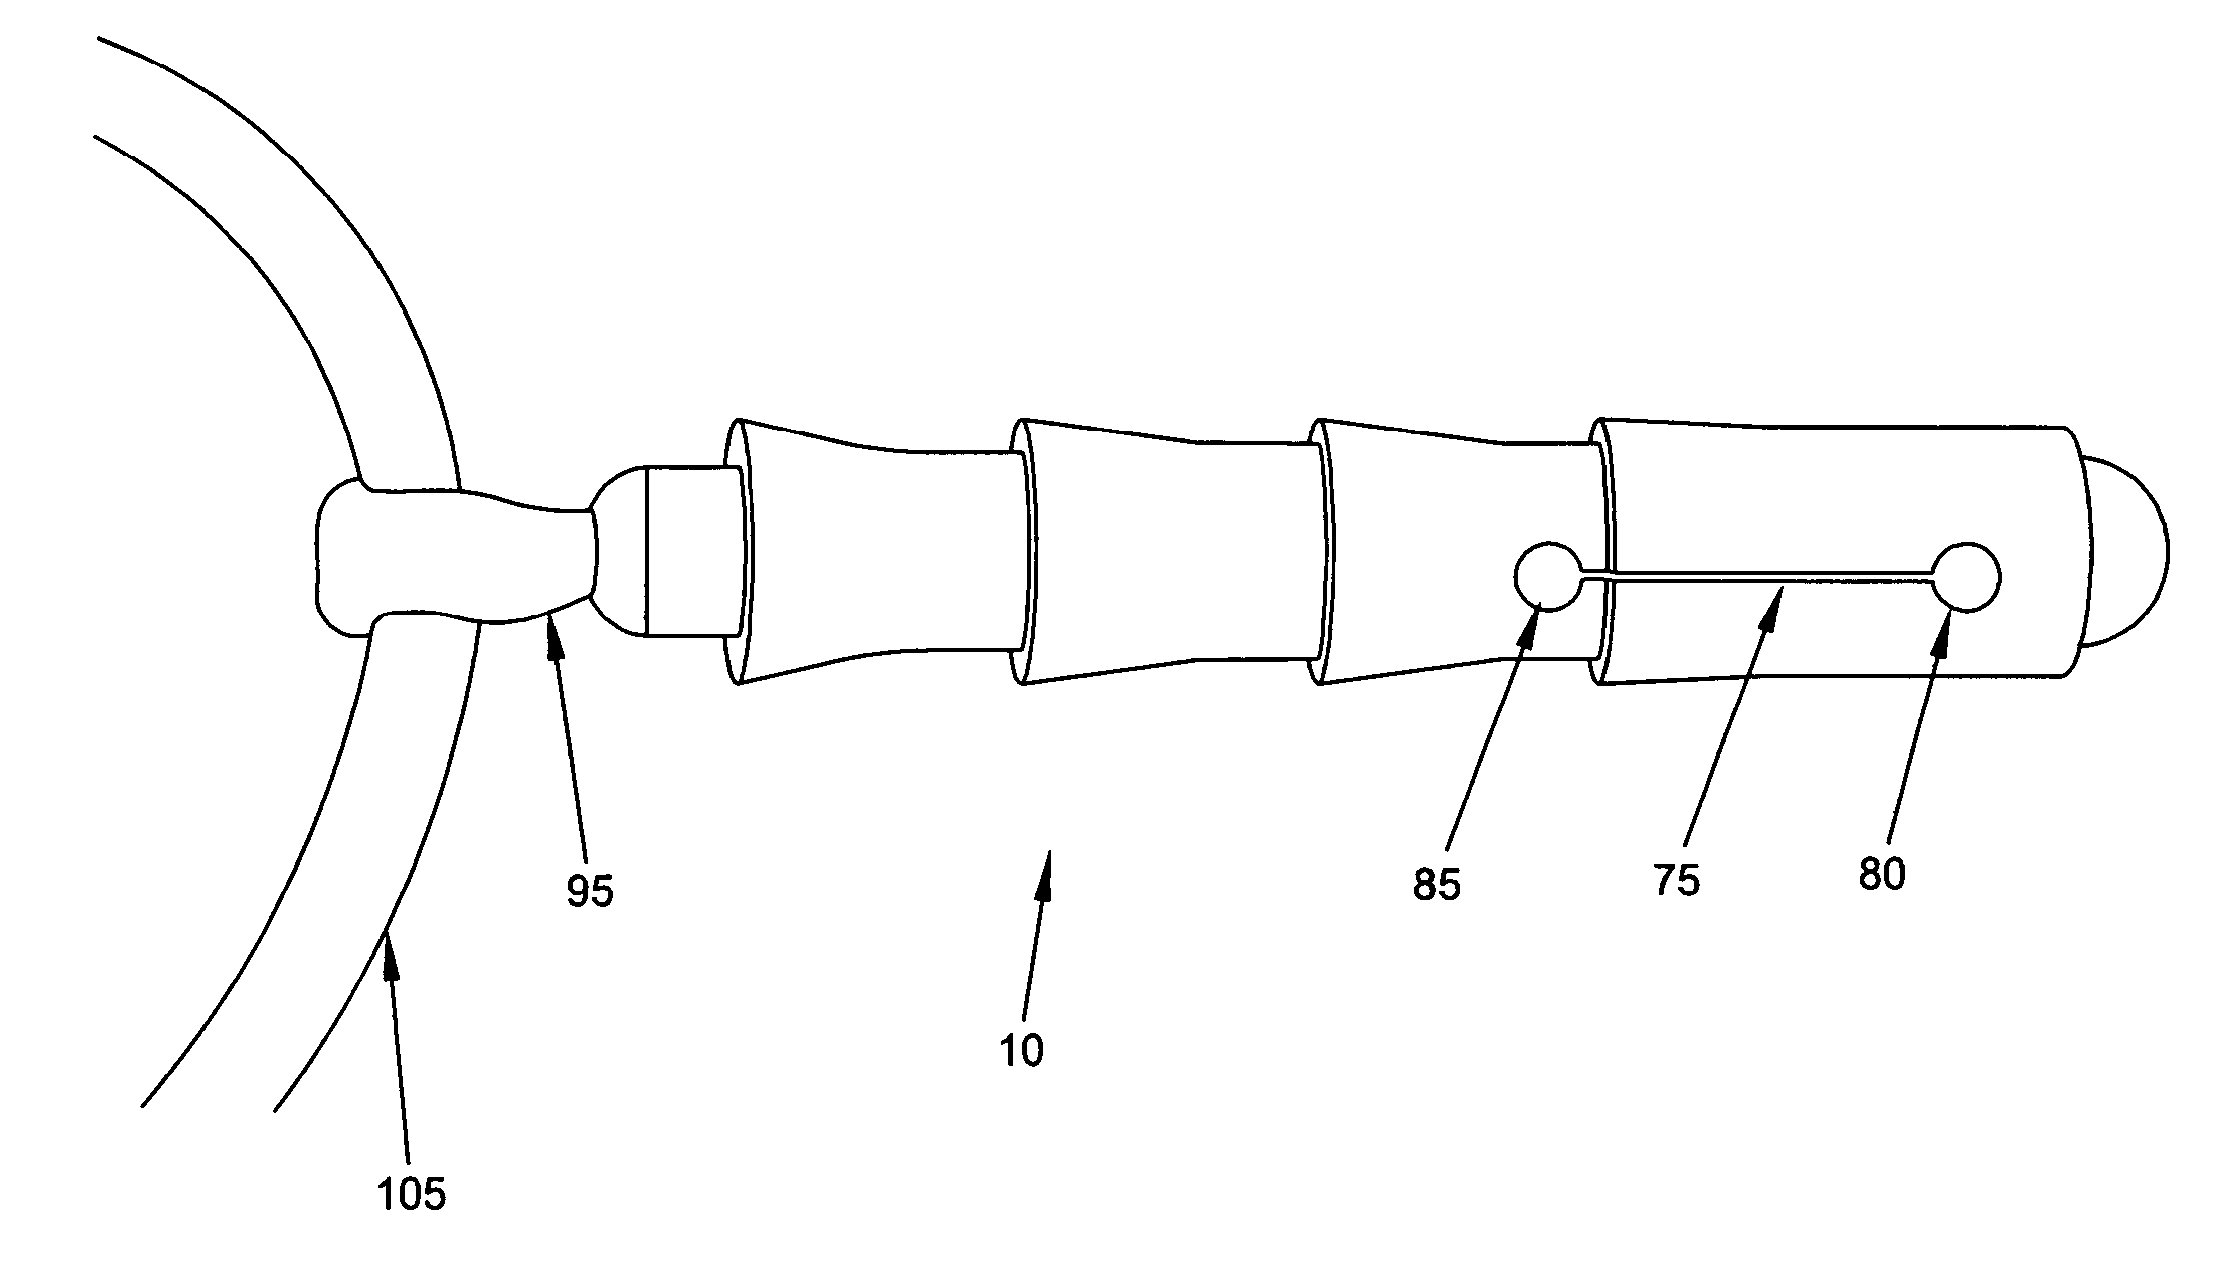 Method and apparatus for re-attaching the labrum to the acetabulum, including the provision and use of a novel suture anchor system